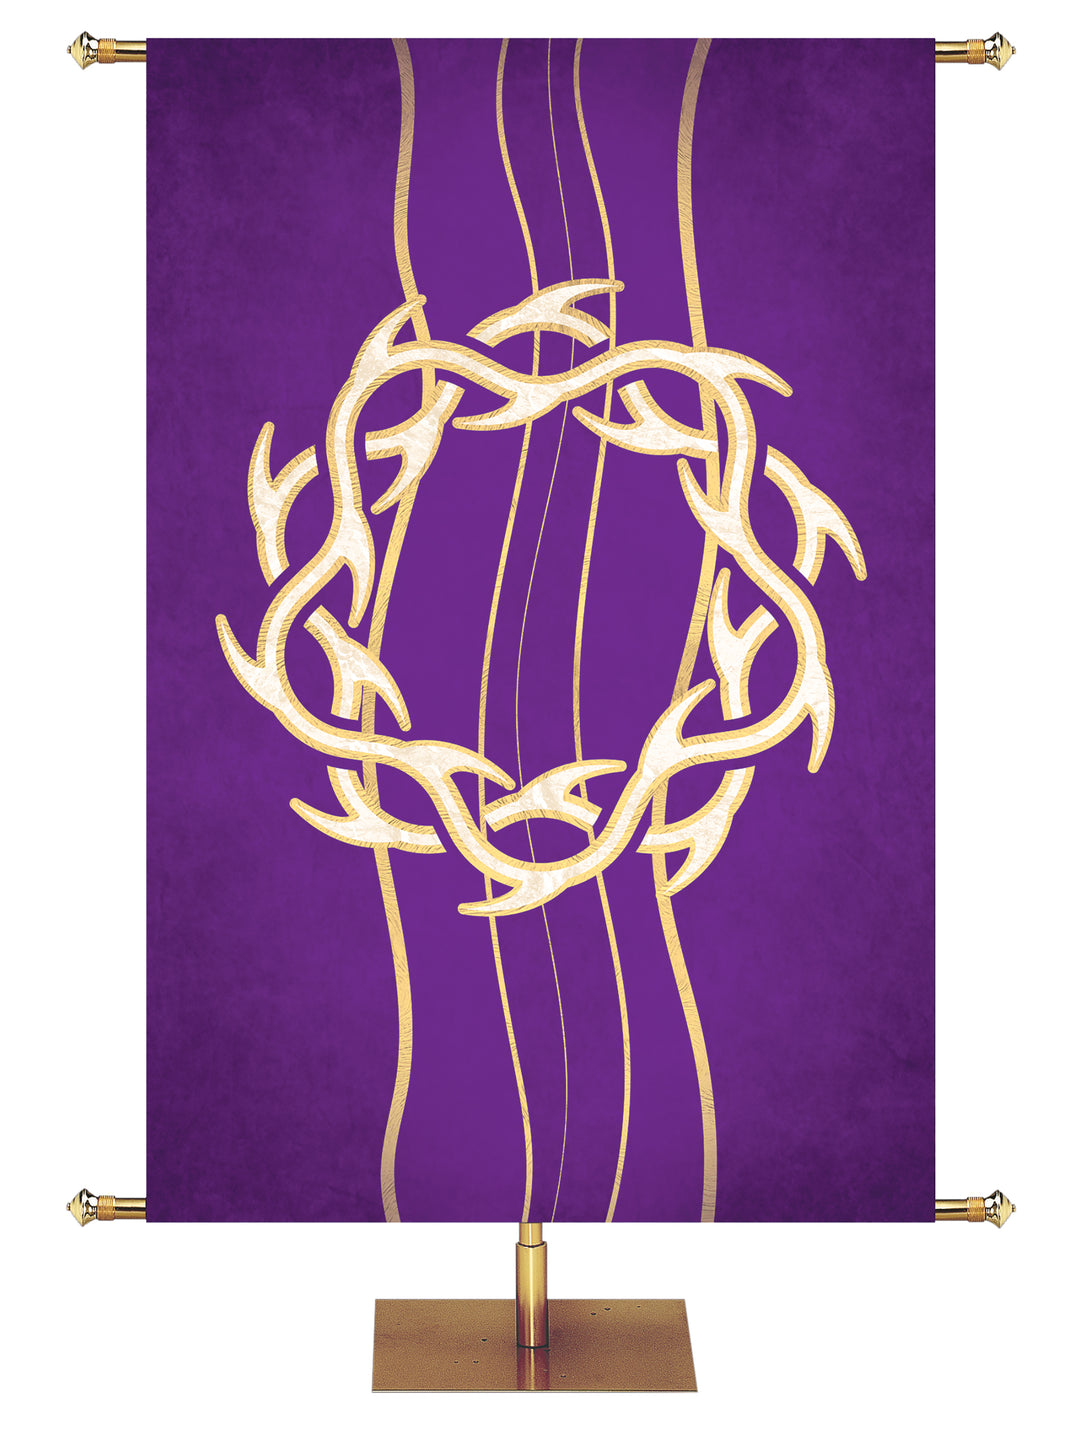 Experiencing God Symbols Crown of Thorns - Liturgical Banners - PraiseBanners